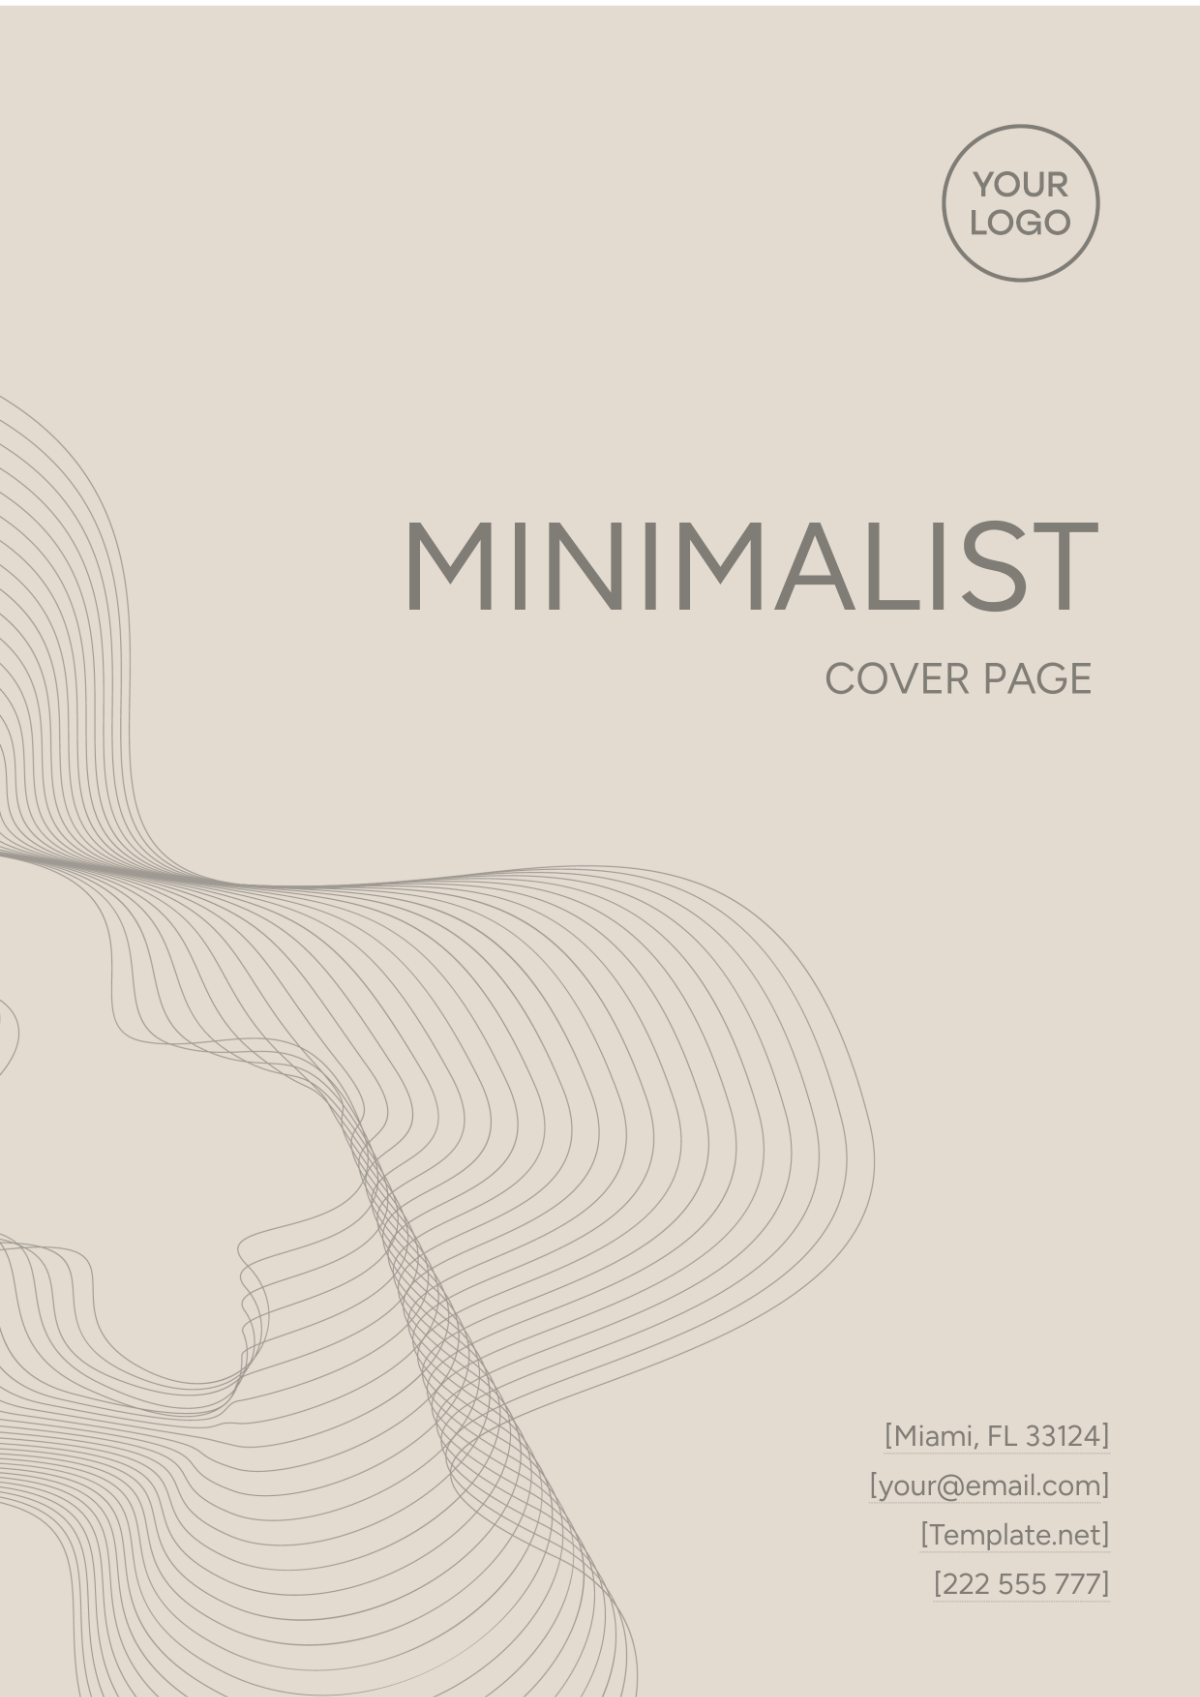 Minimalist Cover Page Image